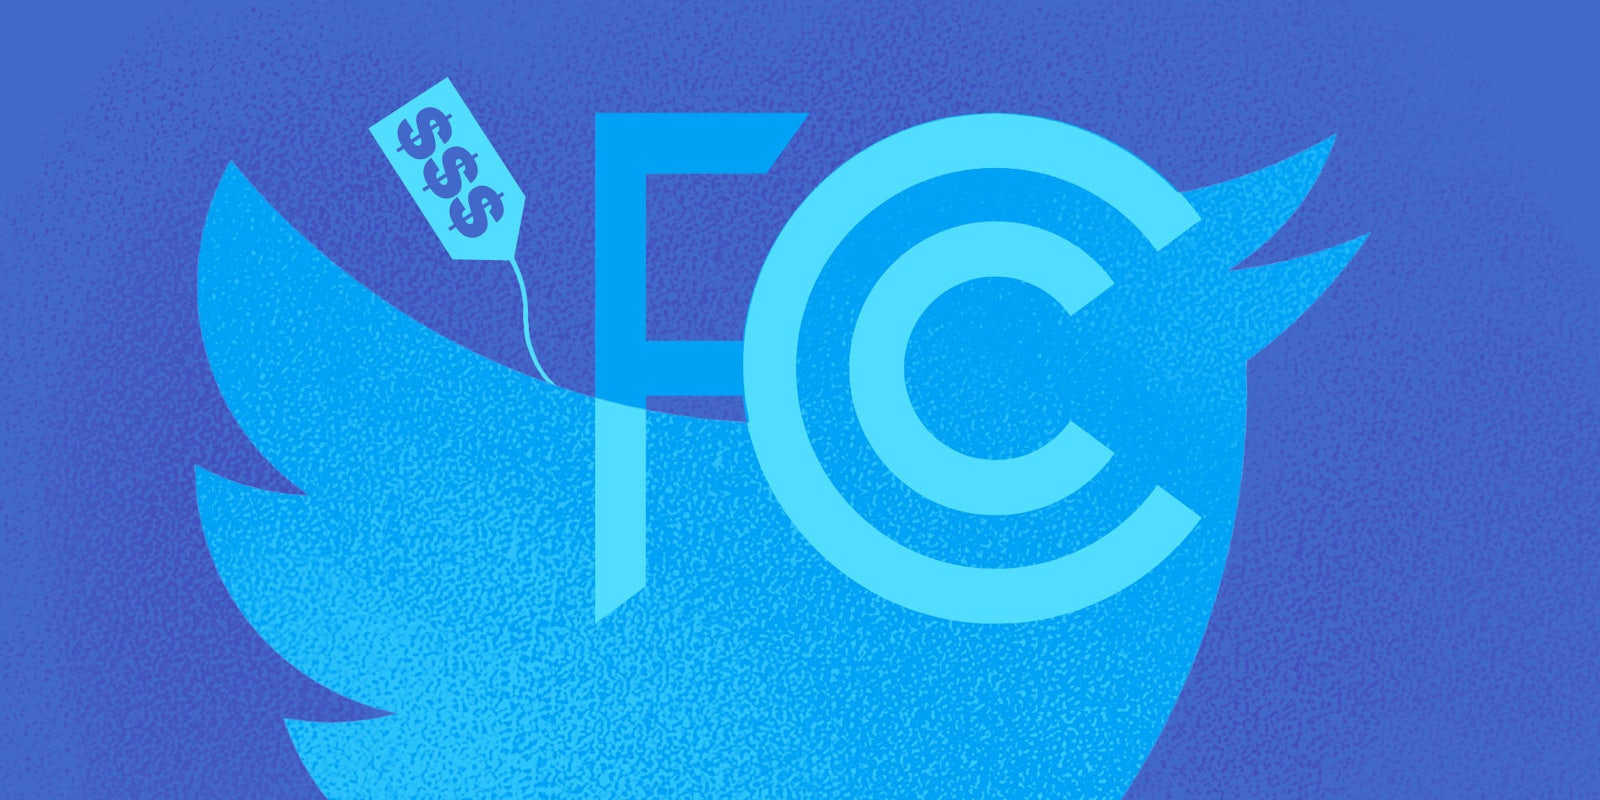 fcc logo on twitter bird logo with a price tag